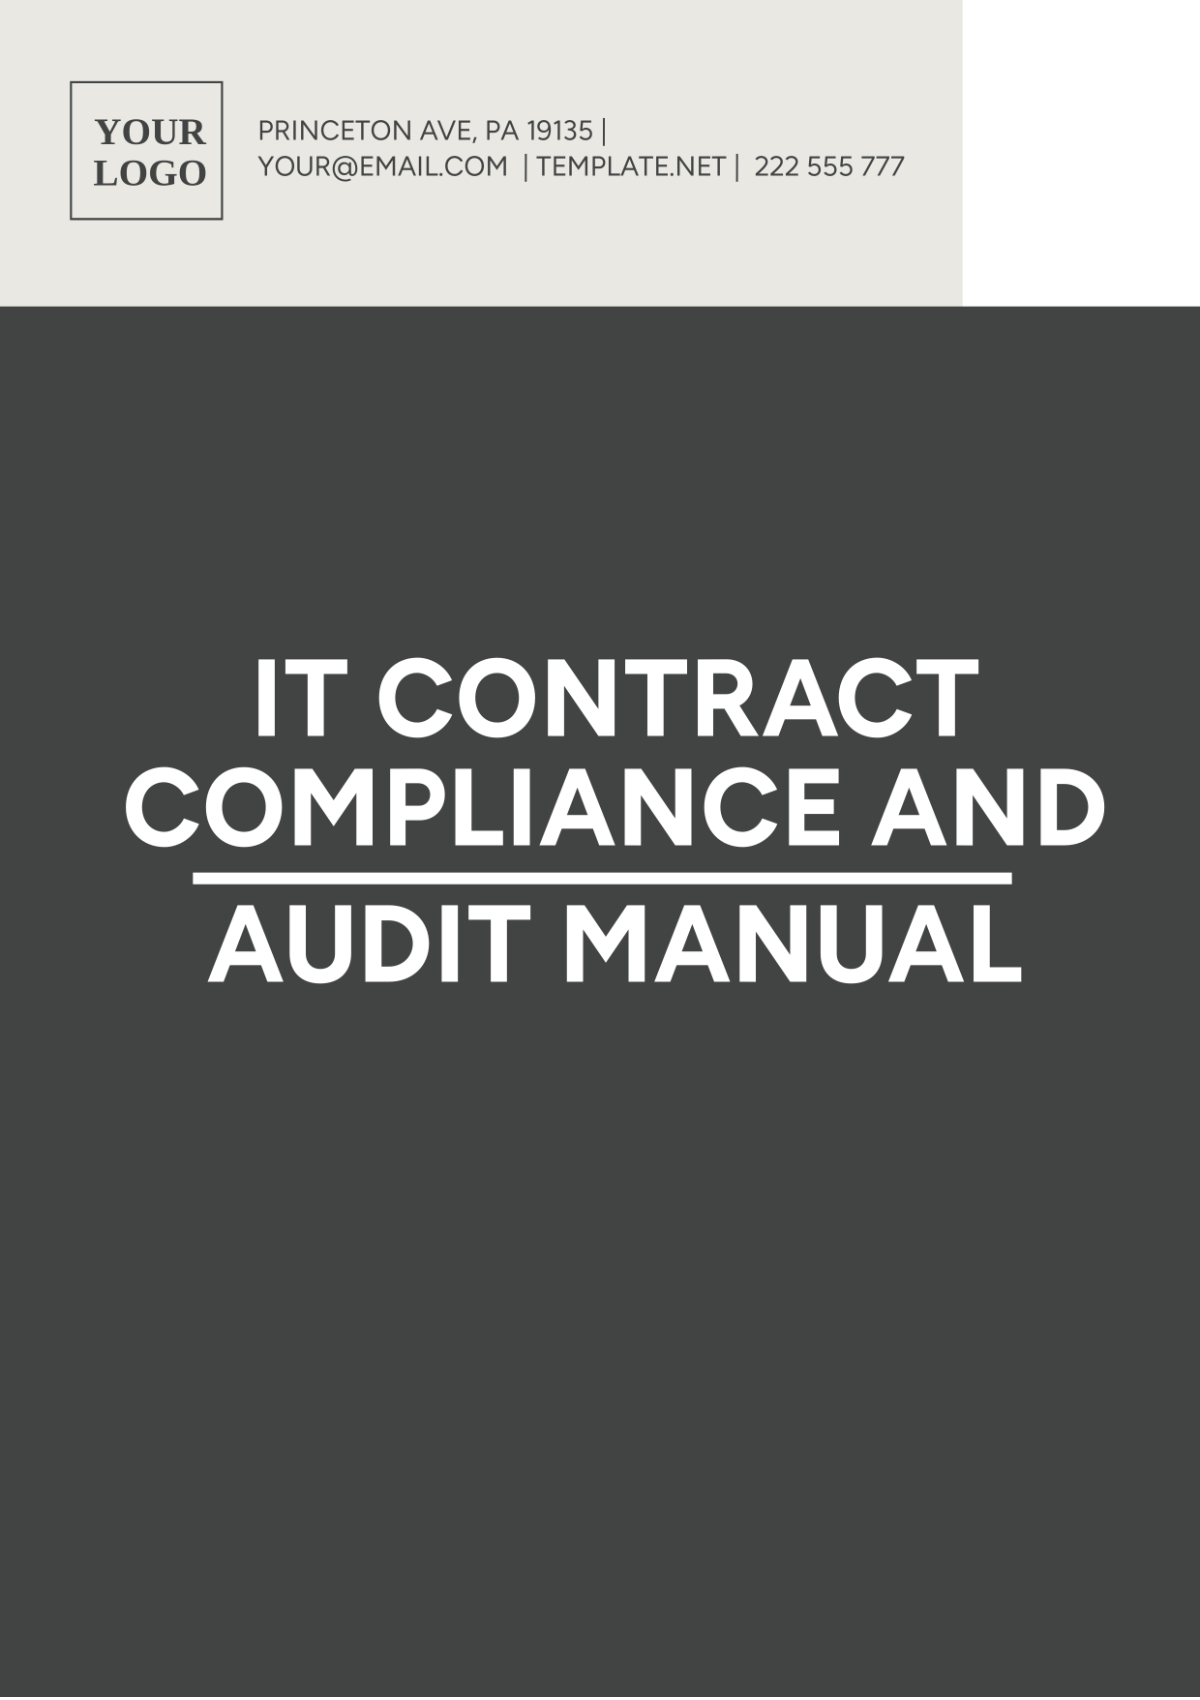 IT Contract Compliance And Audit Manual Template